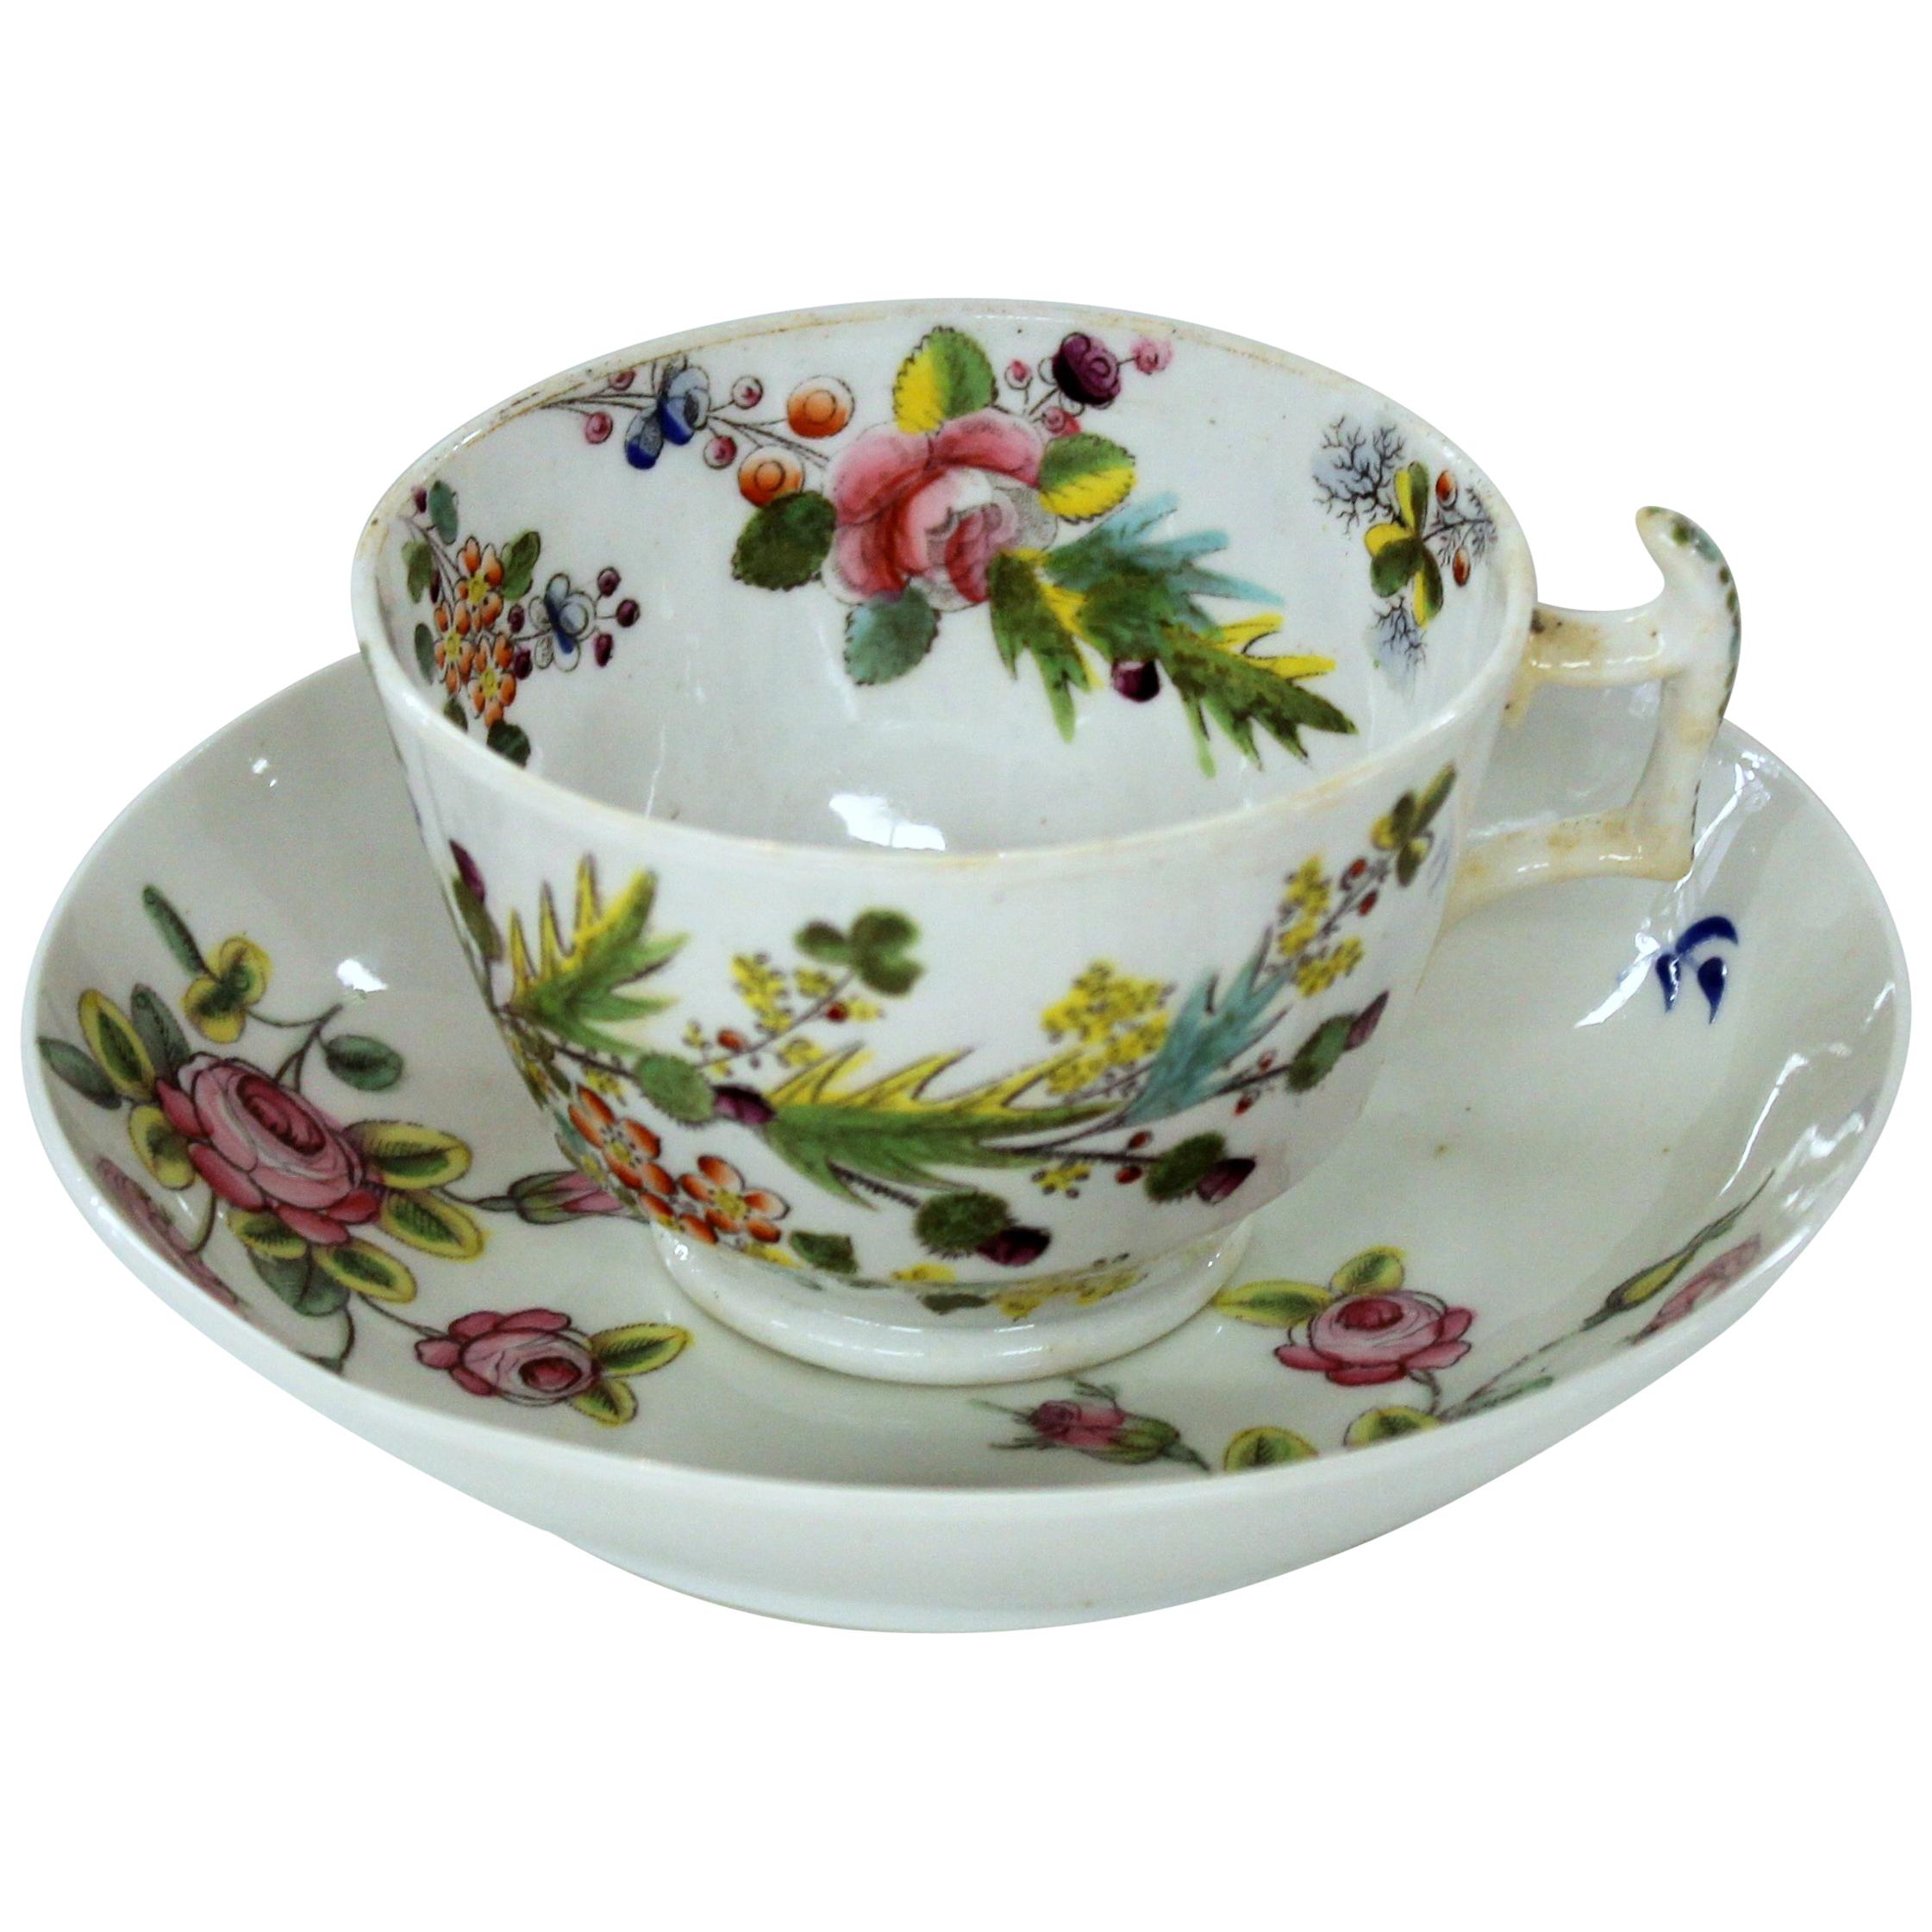 English Early 19th Century New Hall Porcelain Floral Decor Cup and Saucer